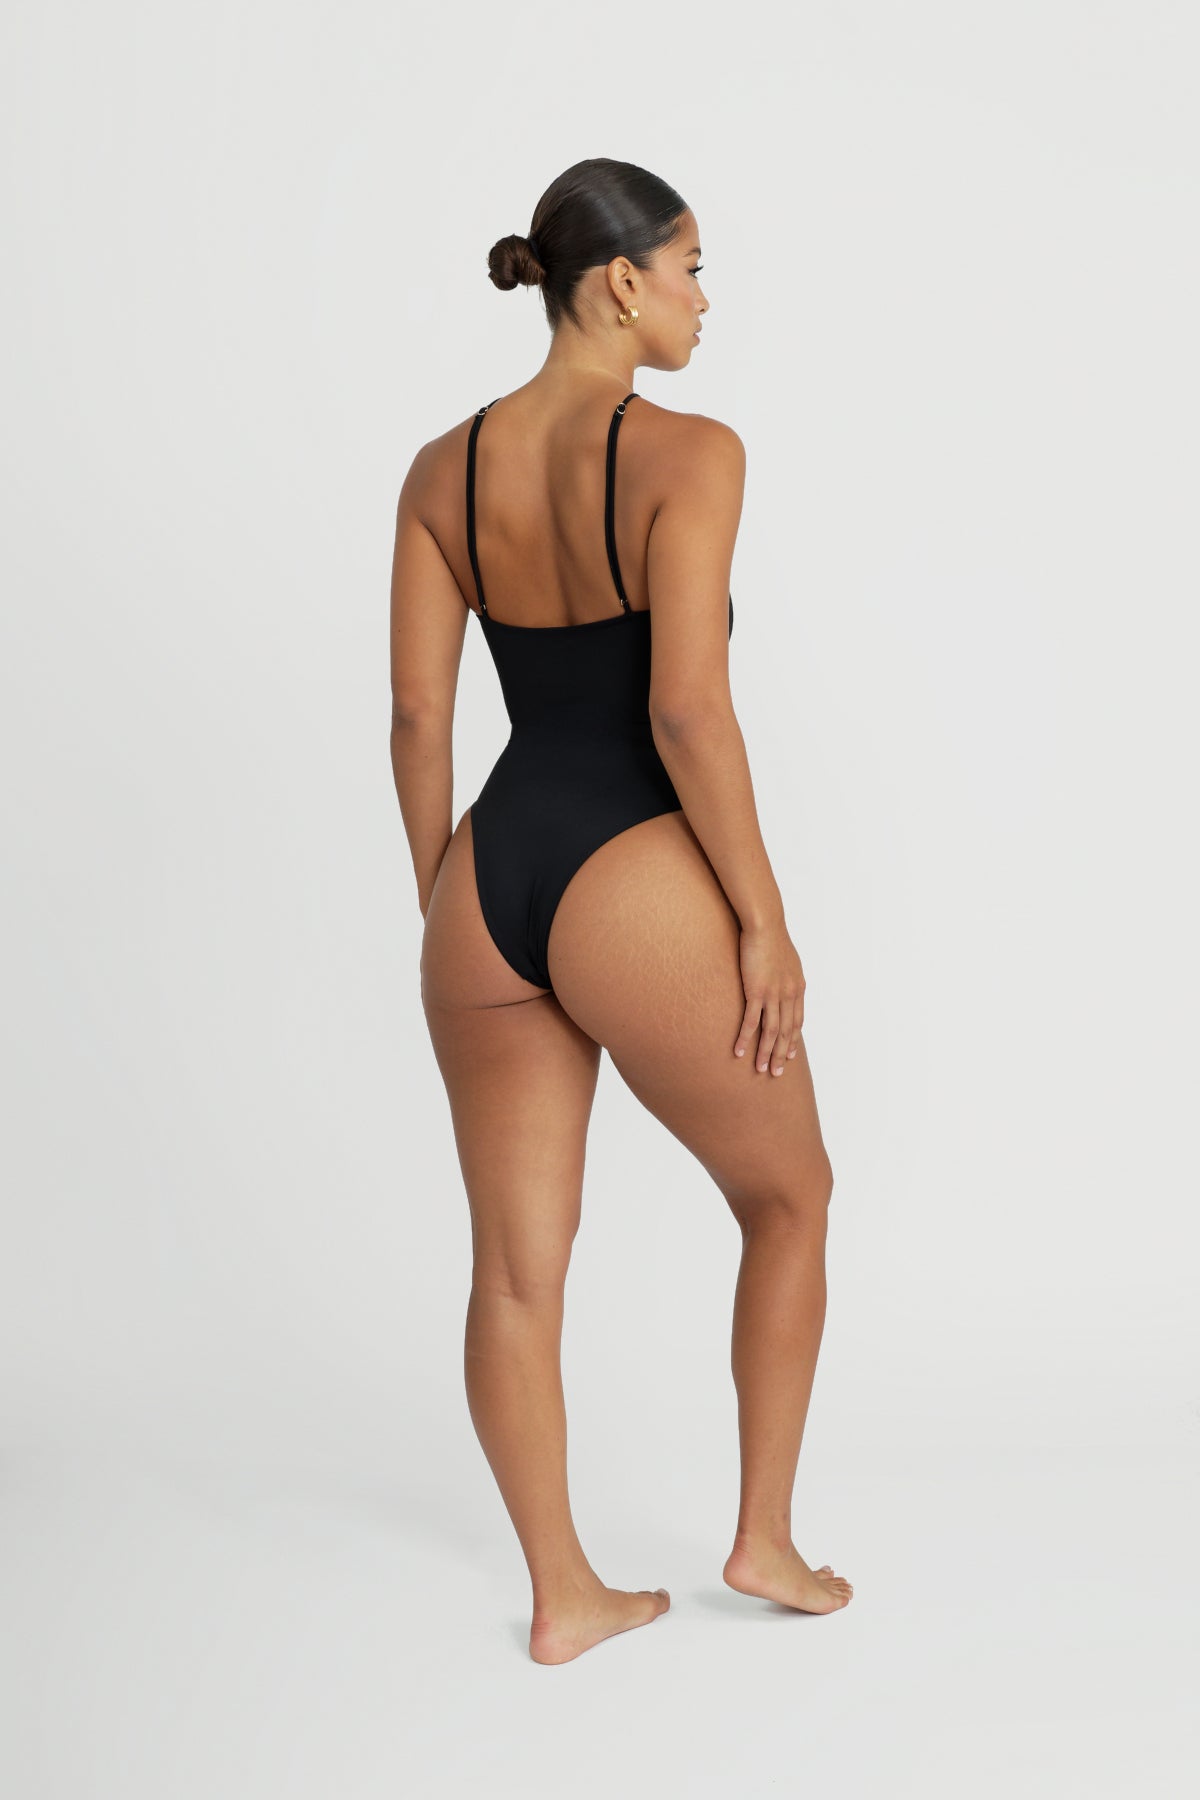 CAICOS BLACK ONE PIECE SWIMSUIT WITH ACRYLIC HARDWARE